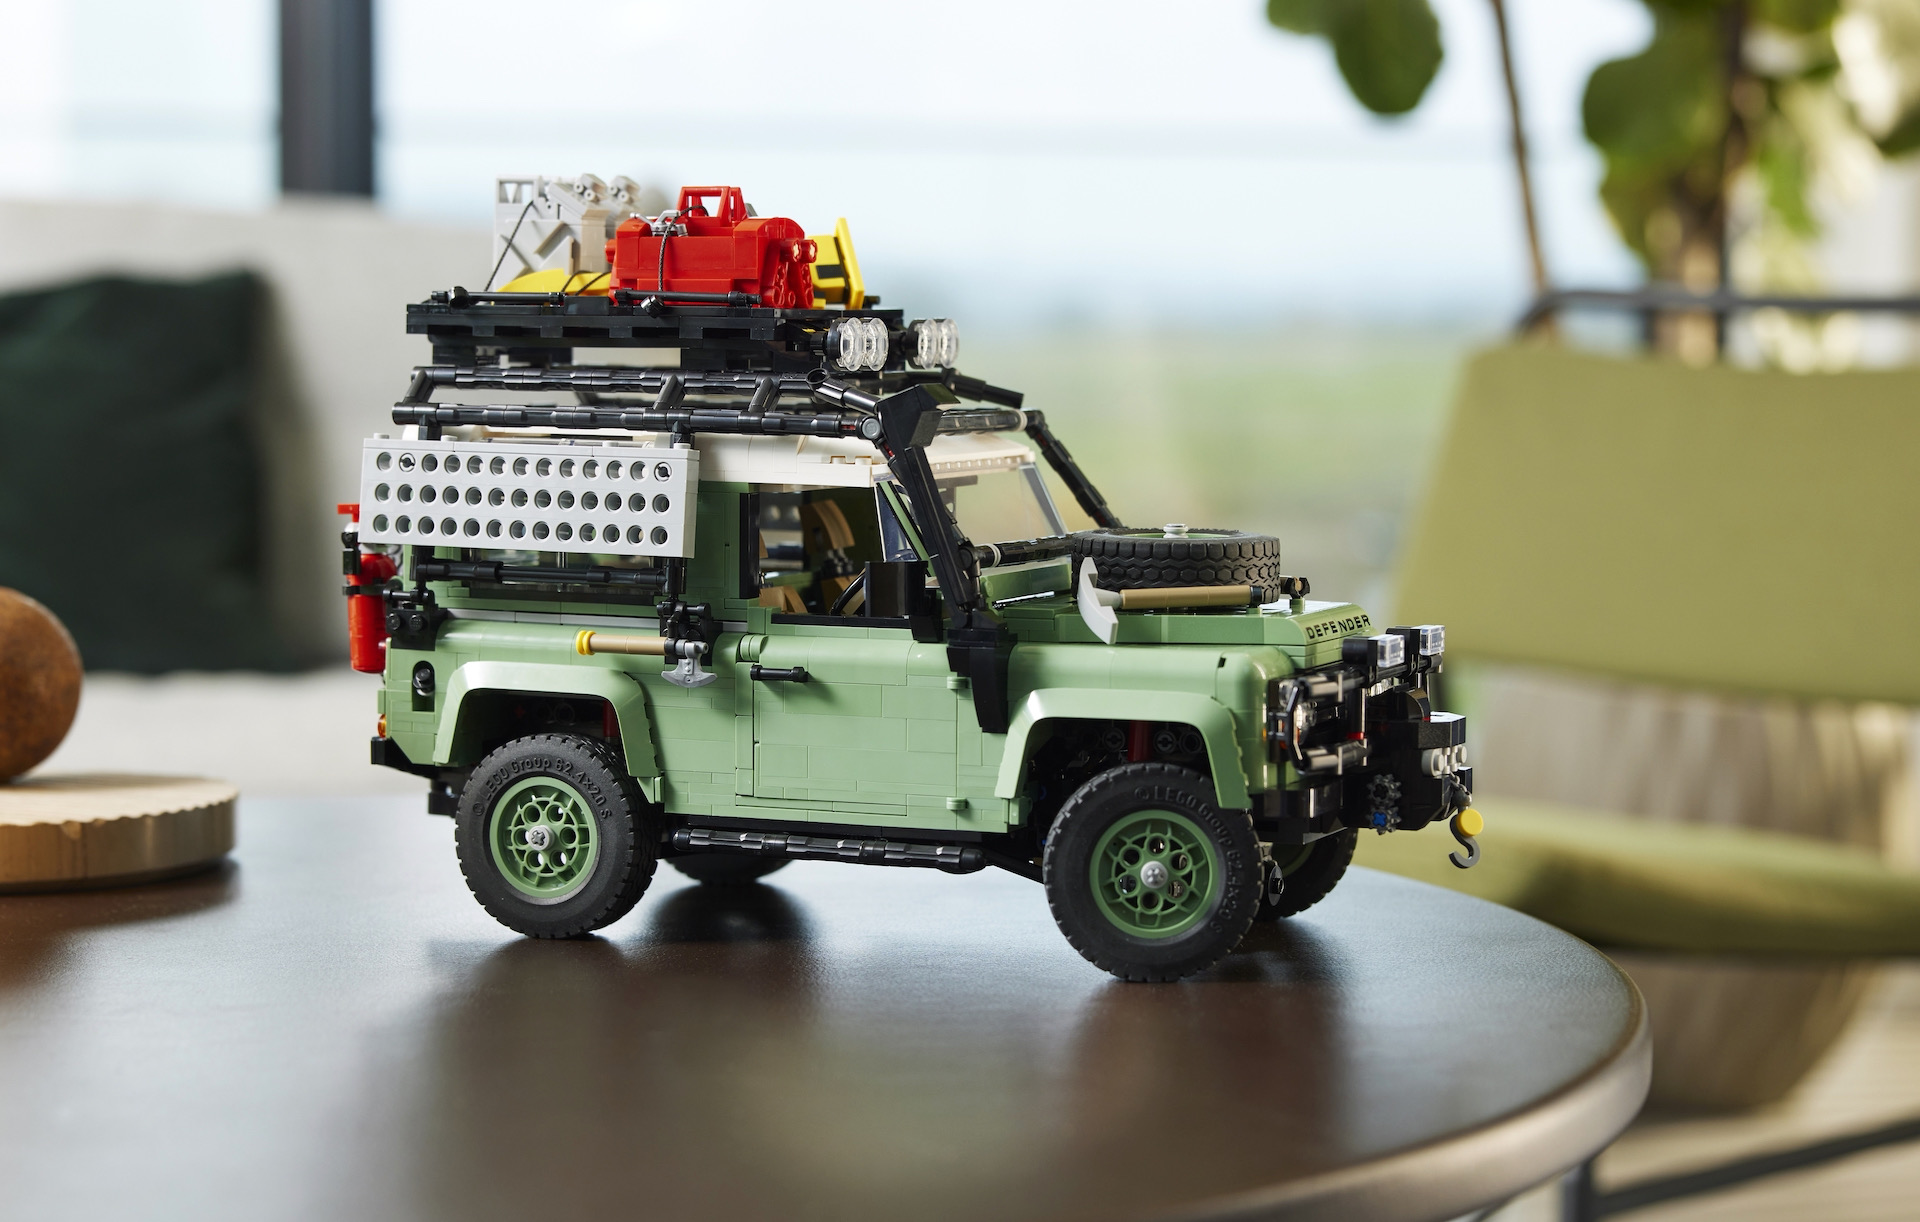 Lego releases monster 2336-piece classic Land Rover Defender 90